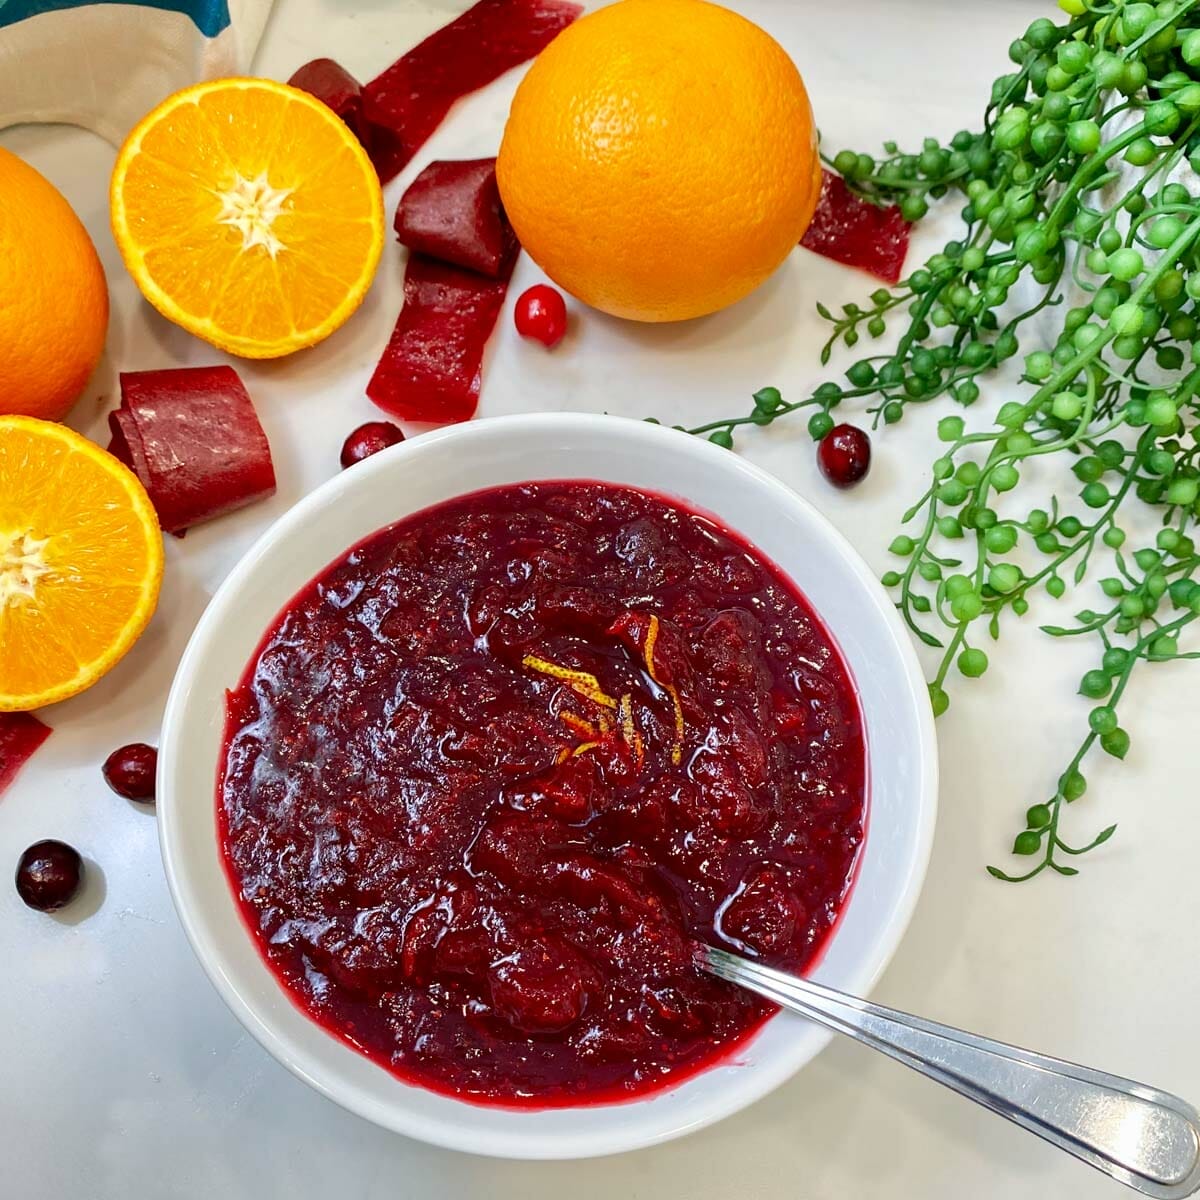 Homemade Cranberry Sauce with Orange and Ginger